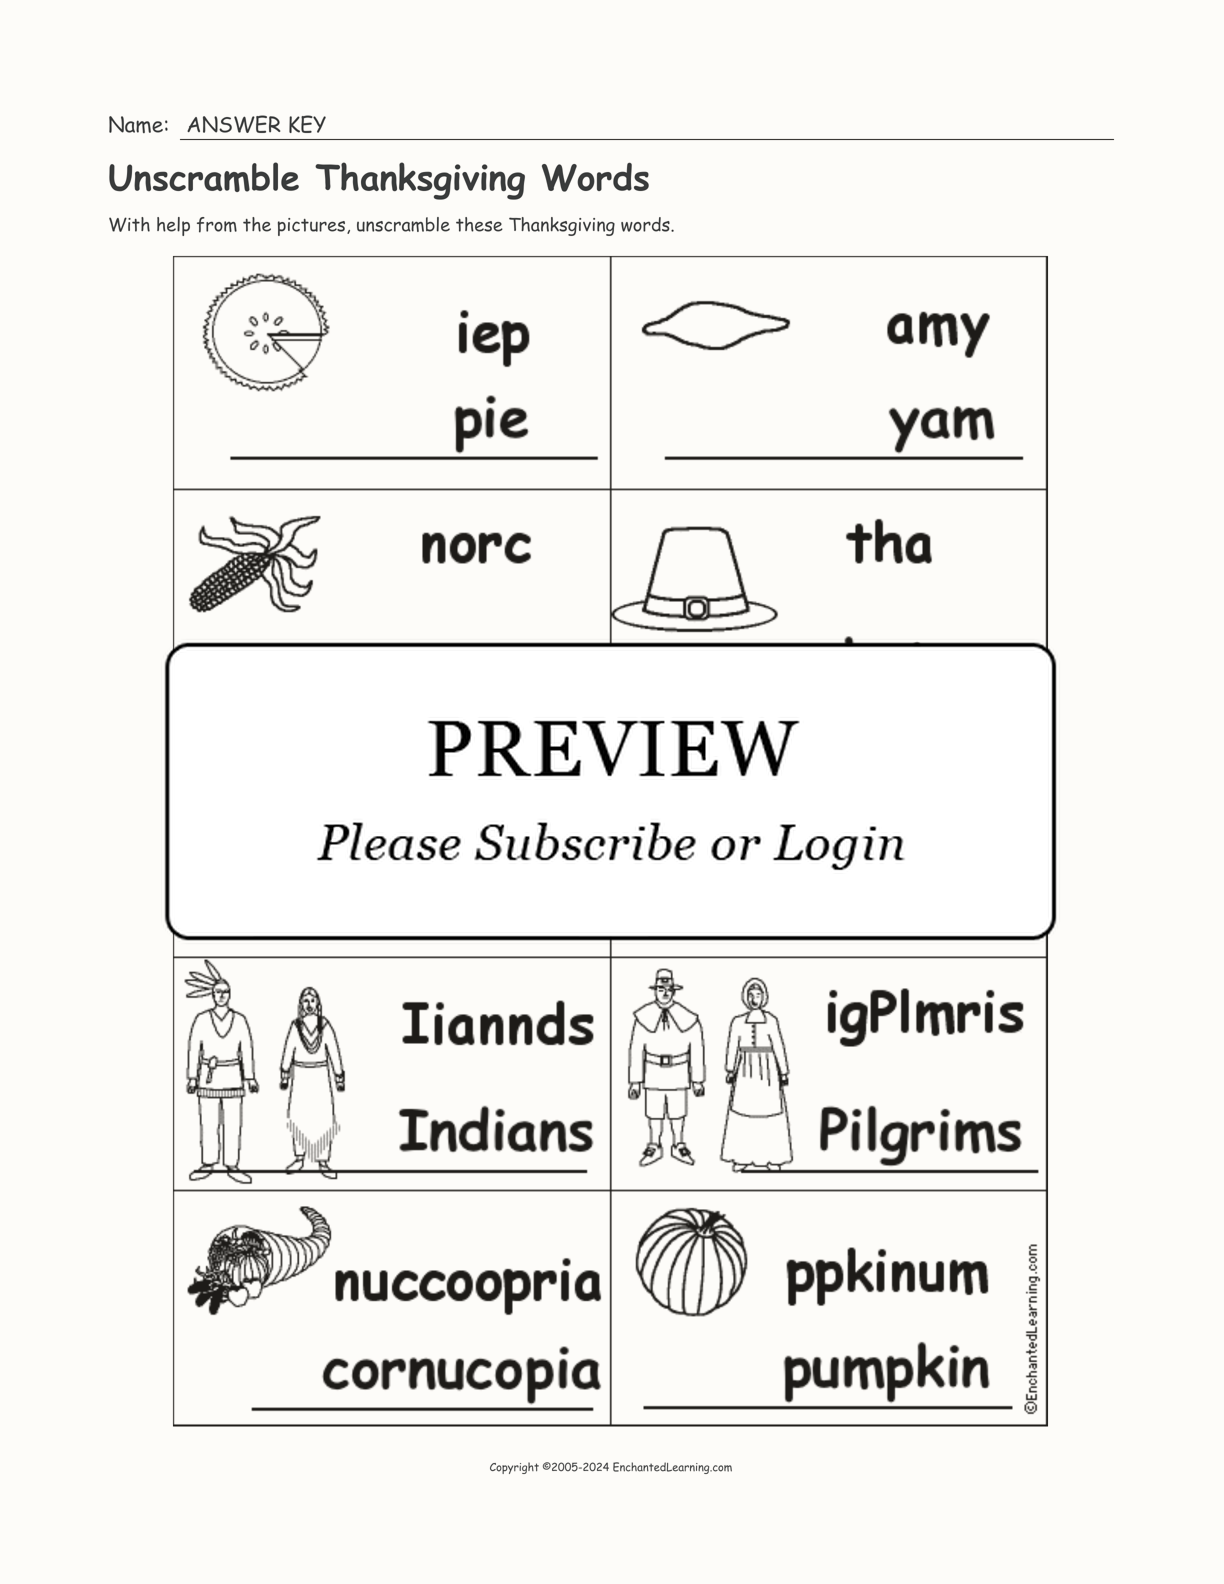 Unscramble Thanksgiving Words interactive worksheet page 2